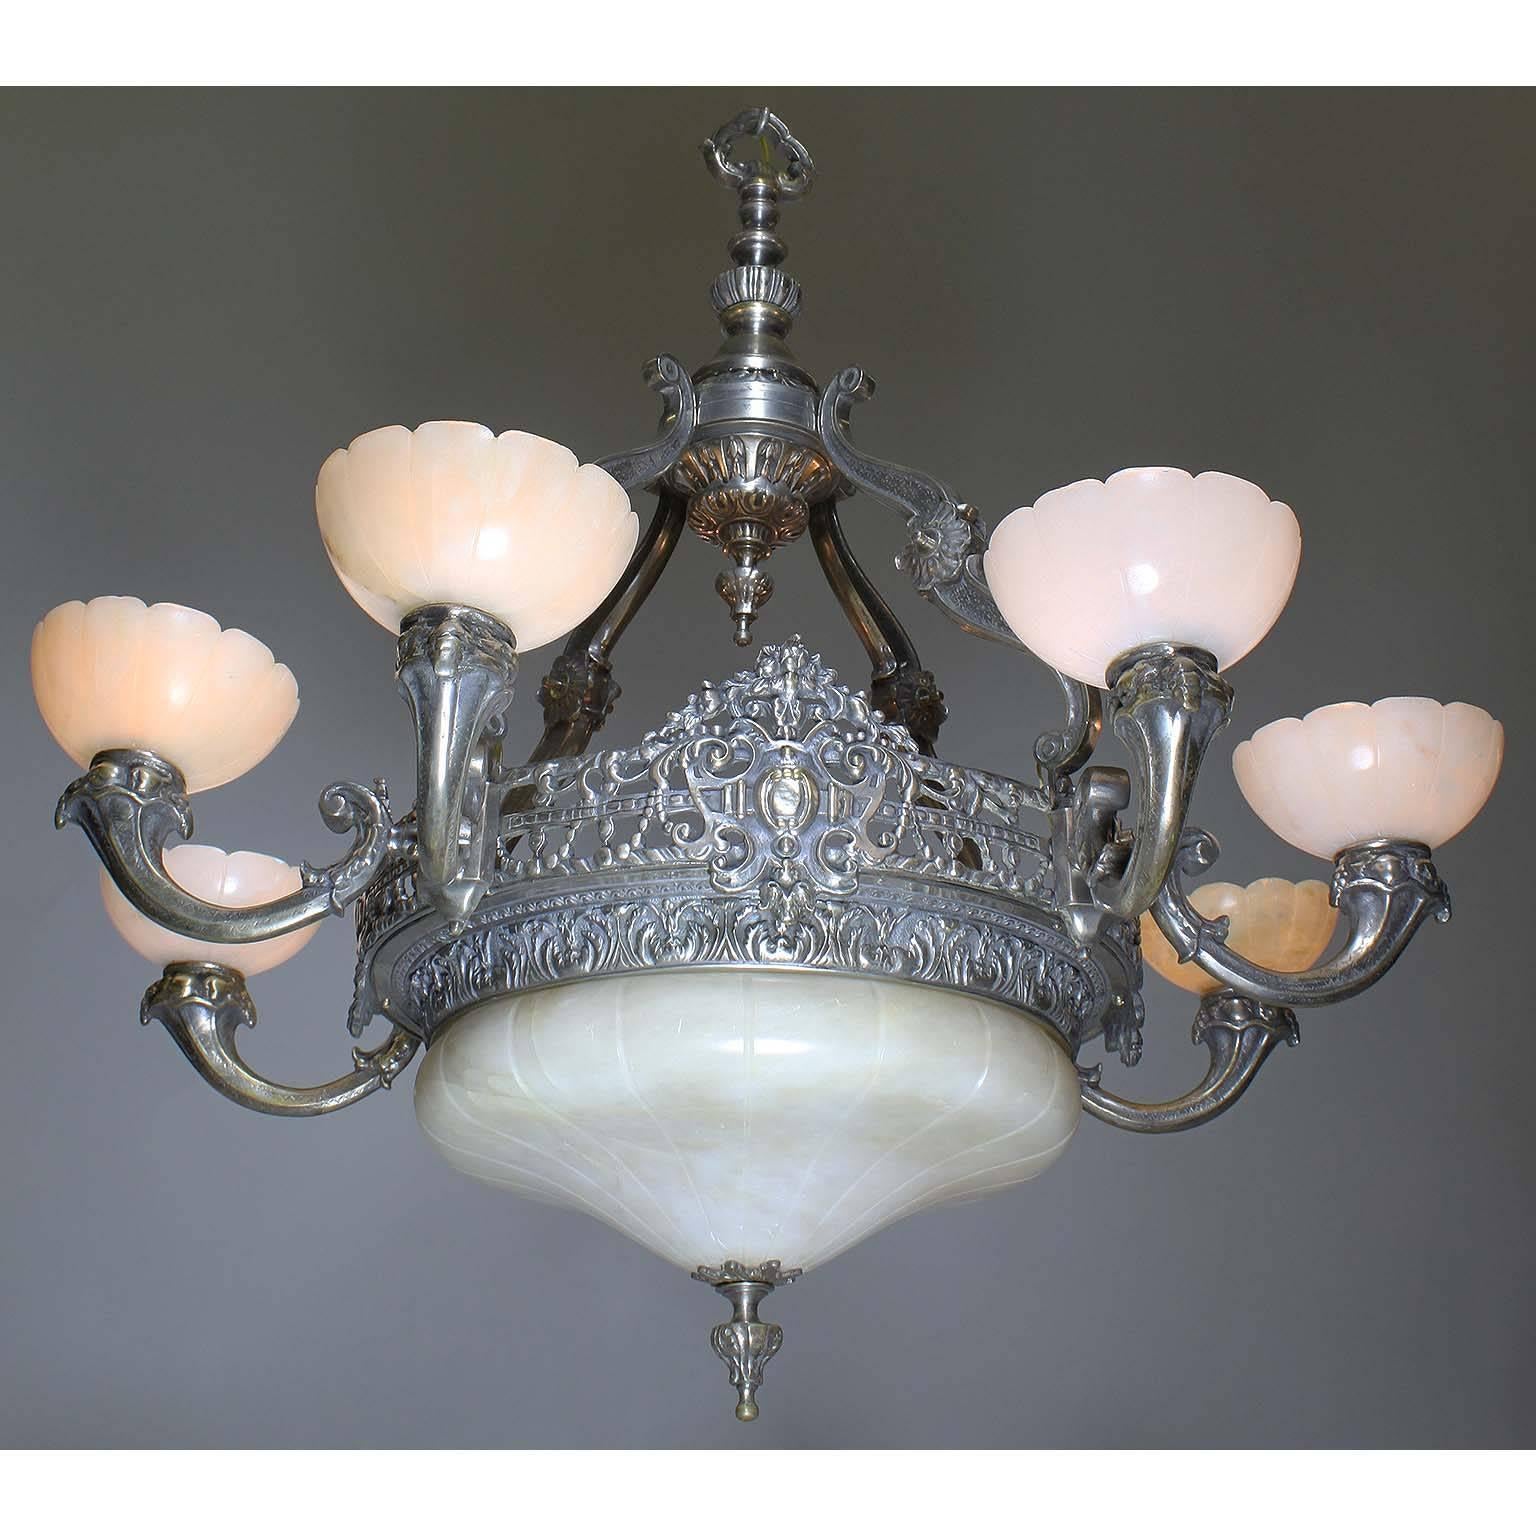 A French early 20th century Art Deco silvered bronze and carved alabaster eight-light chandelier. The pierced silver plated bronze frame, suspended by four 